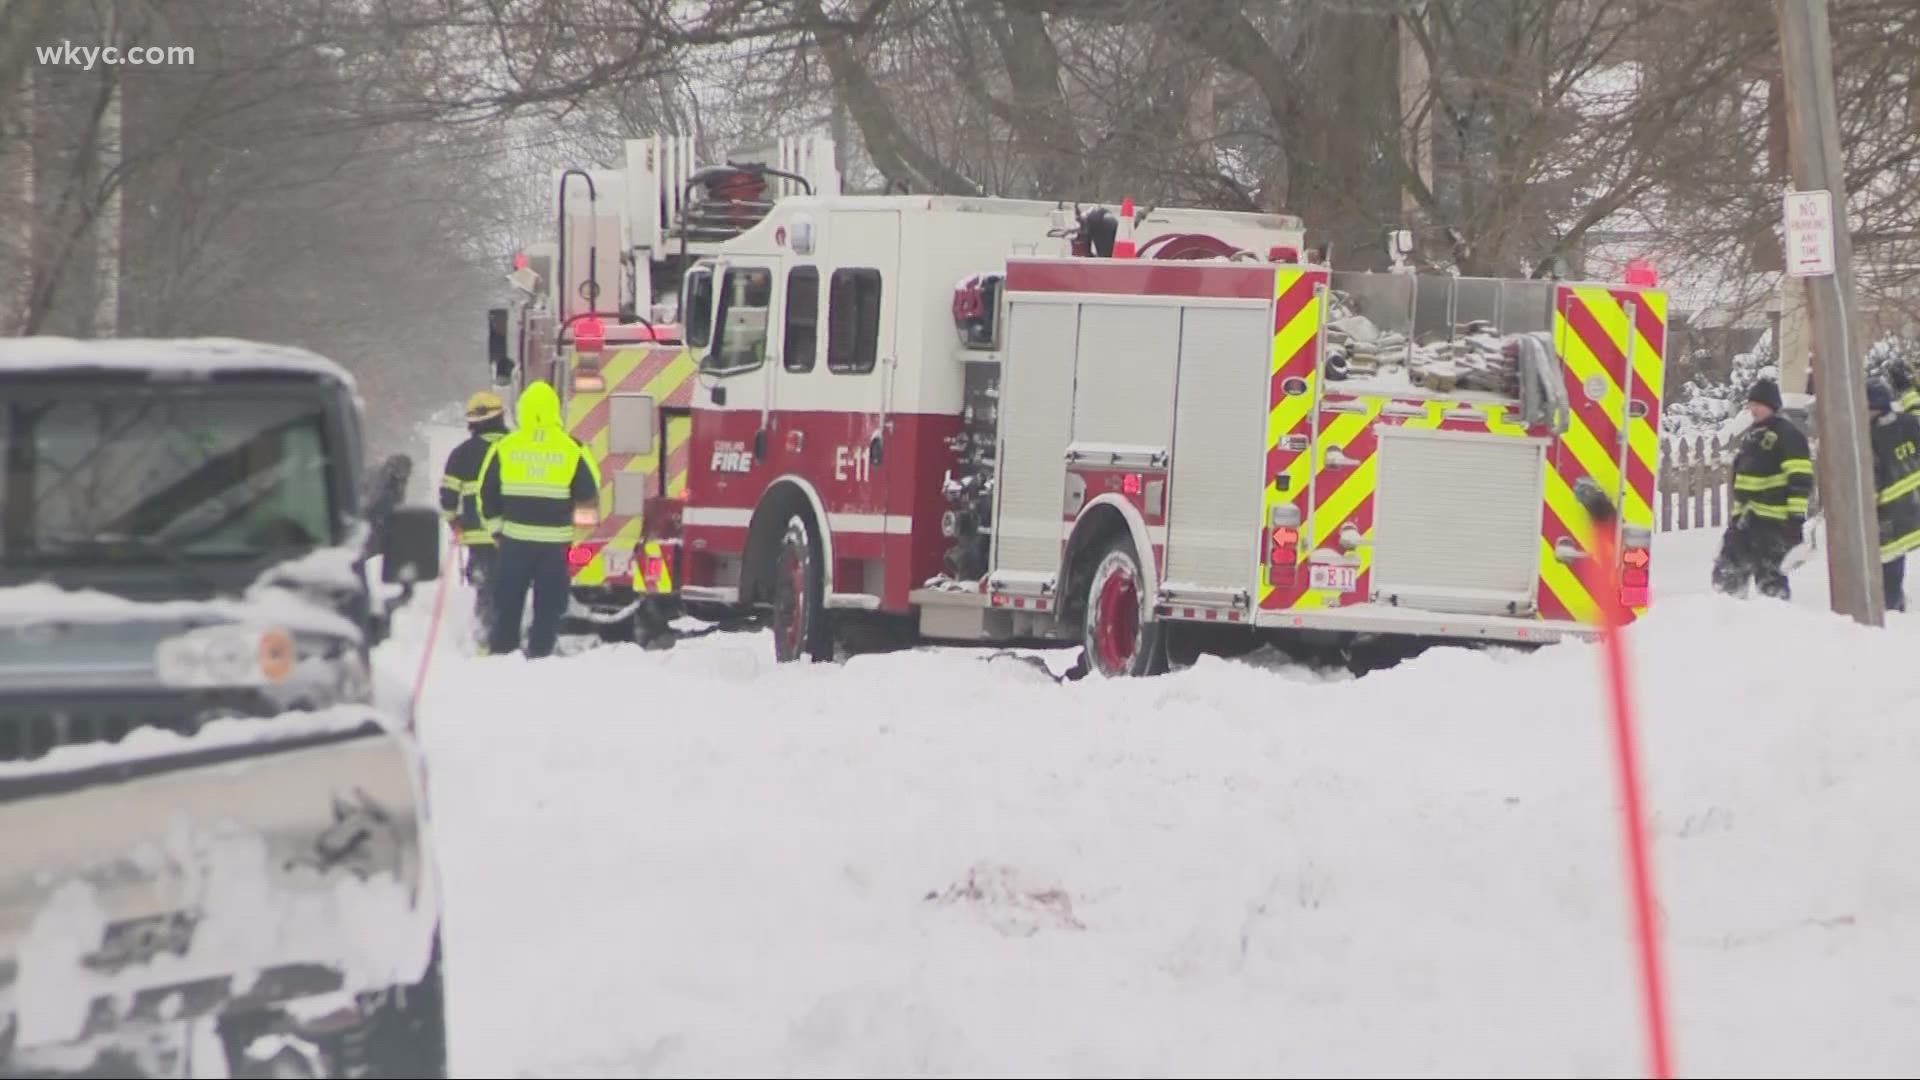 First responders take an extra step when it comes to preparing for the snowy roads. Emma Henderson has the story.